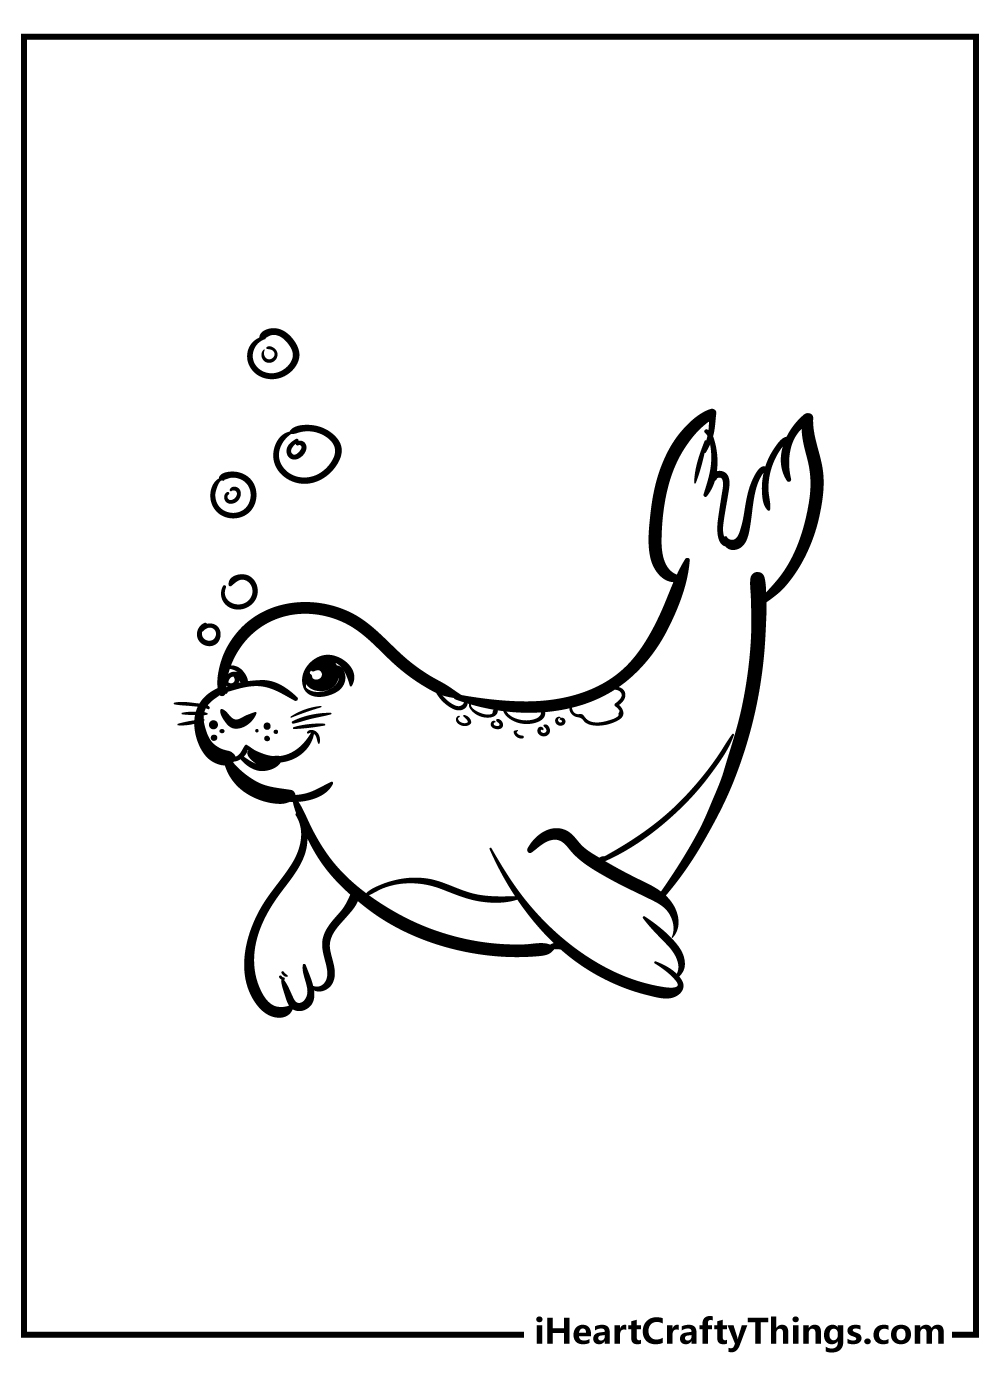 Seal Coloring Book for adults free download